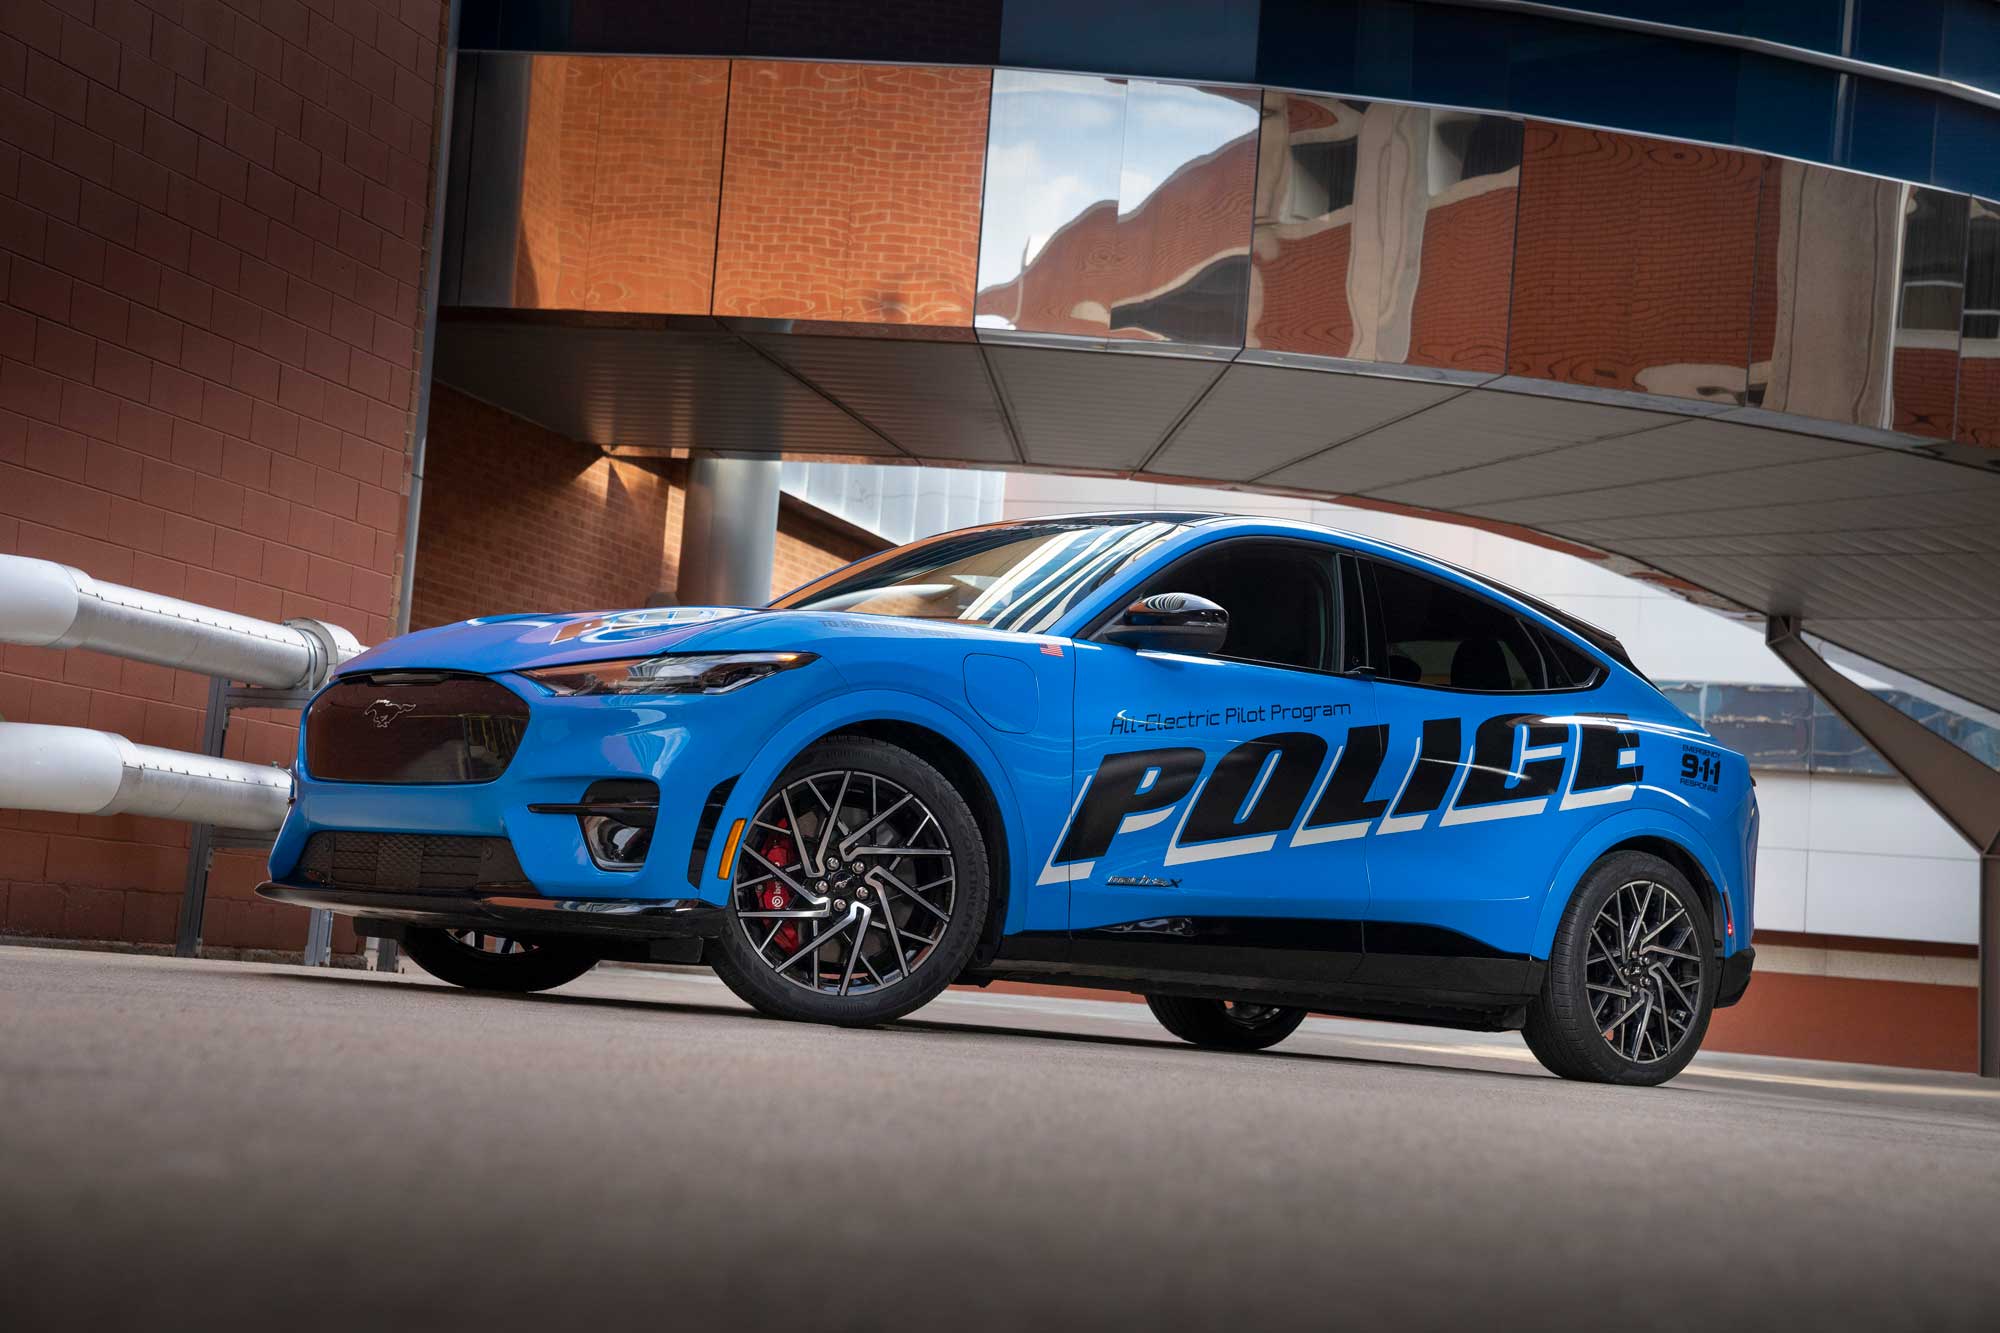 Ford Mustang Mach-E police pursuit vehicle